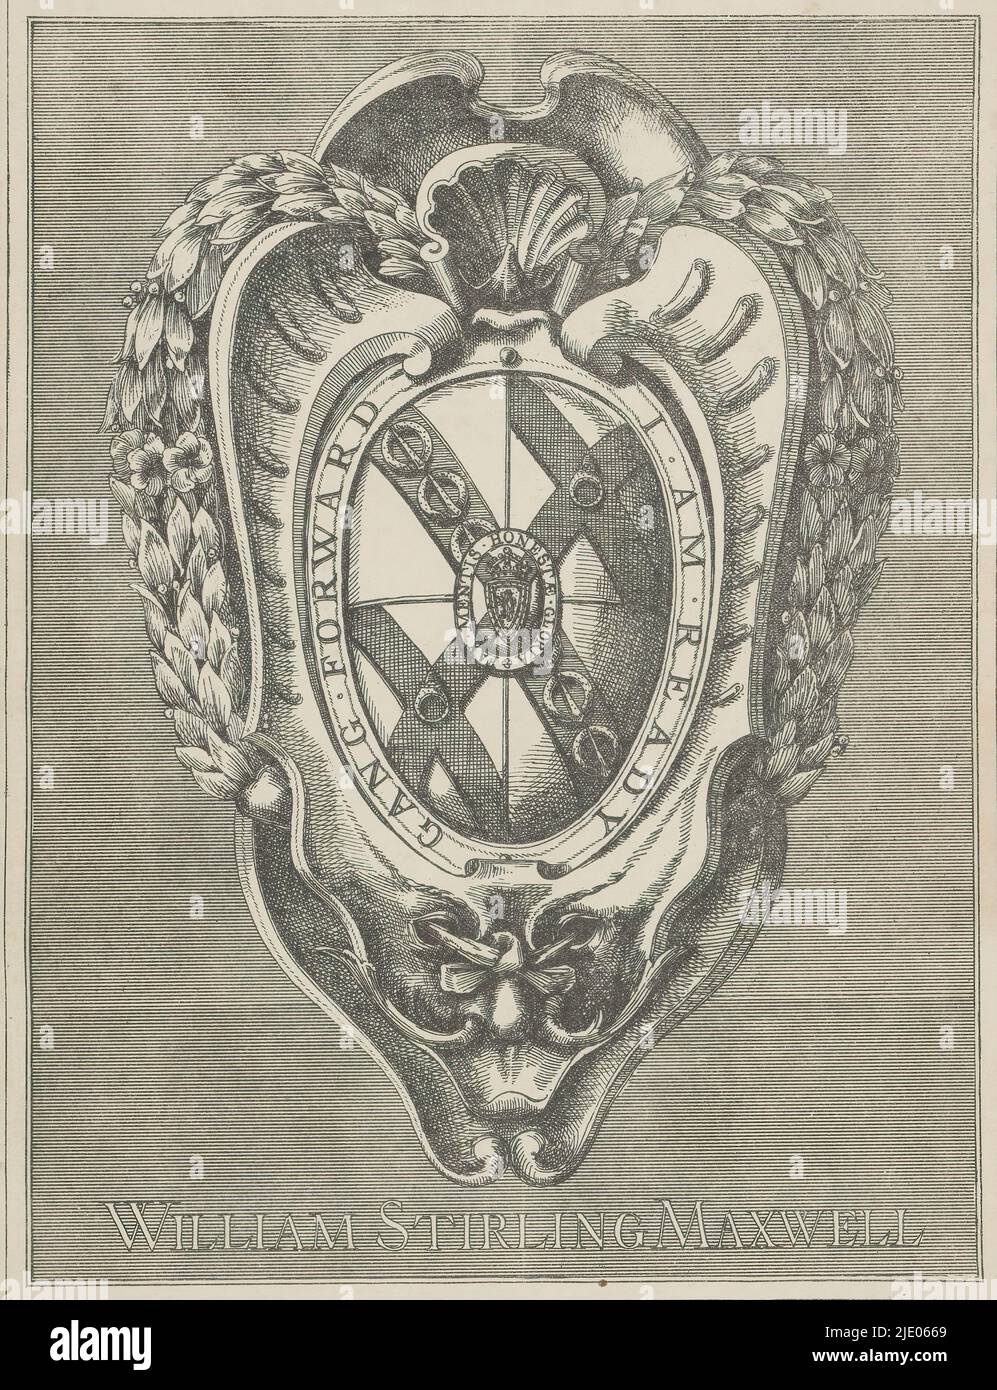 Ex libris of Sir William Stirling Maxwell, Ex libris of book collector Sir William Stirling Maxwell. His coat of arms and mottoes encased in an ornamental frame. Ex libris pasted to cover page. This print is part of an album., after design by: William Stirling Maxwell, 1838 - 1878, paper, etching, height 225 mm × width 173 mm Stock Photo